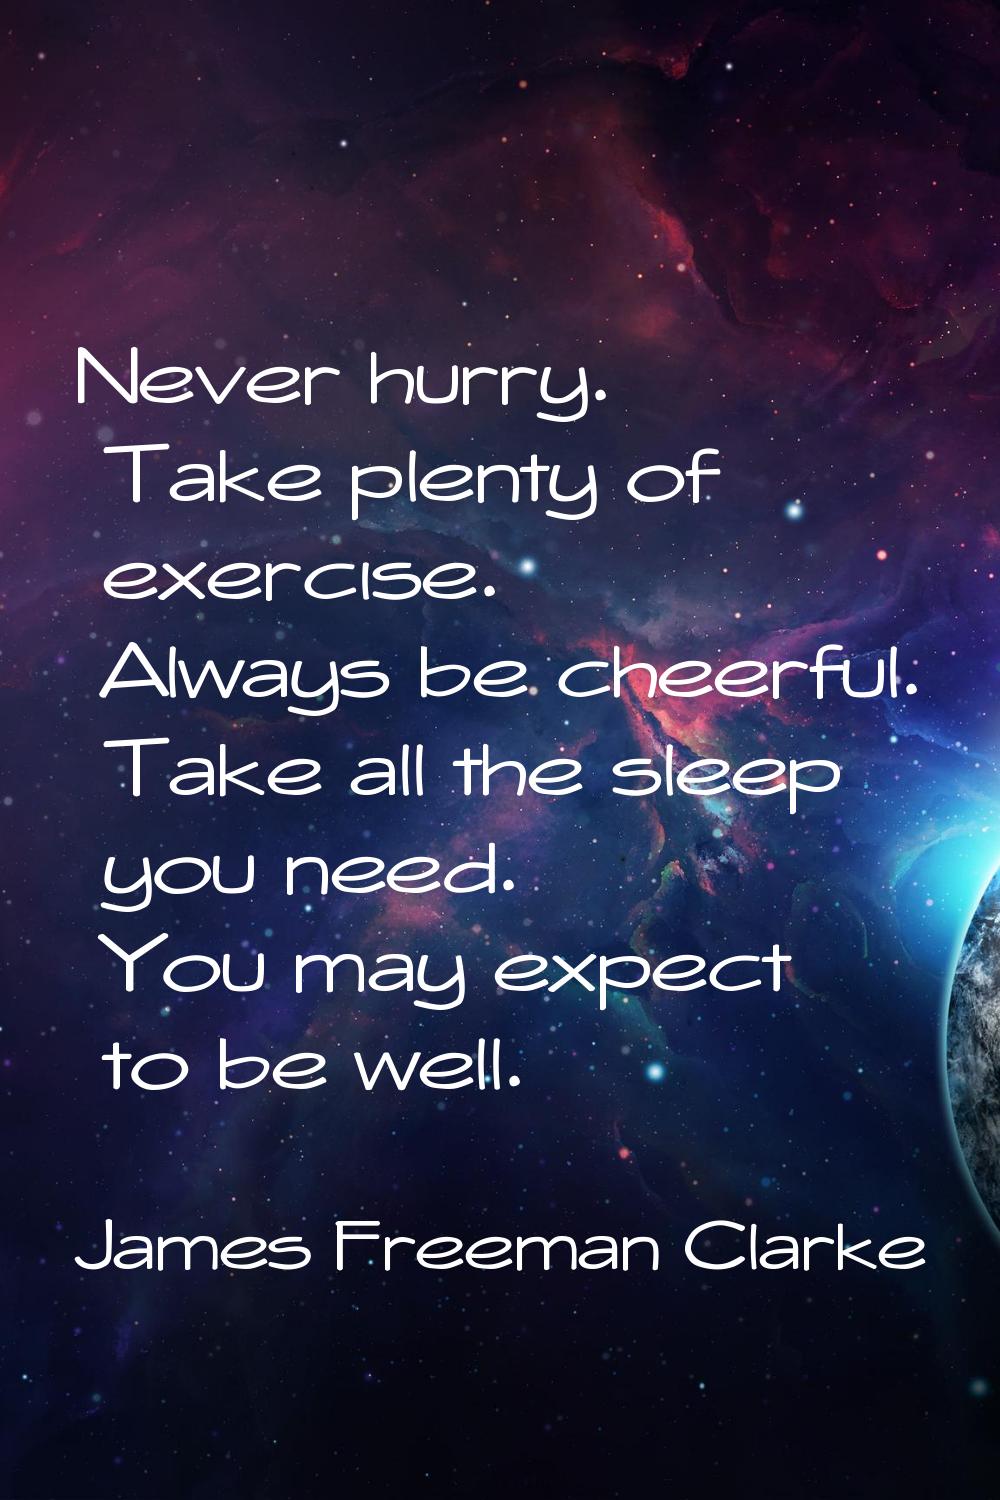 Never hurry. Take plenty of exercise. Always be cheerful. Take all the sleep you need. You may expe